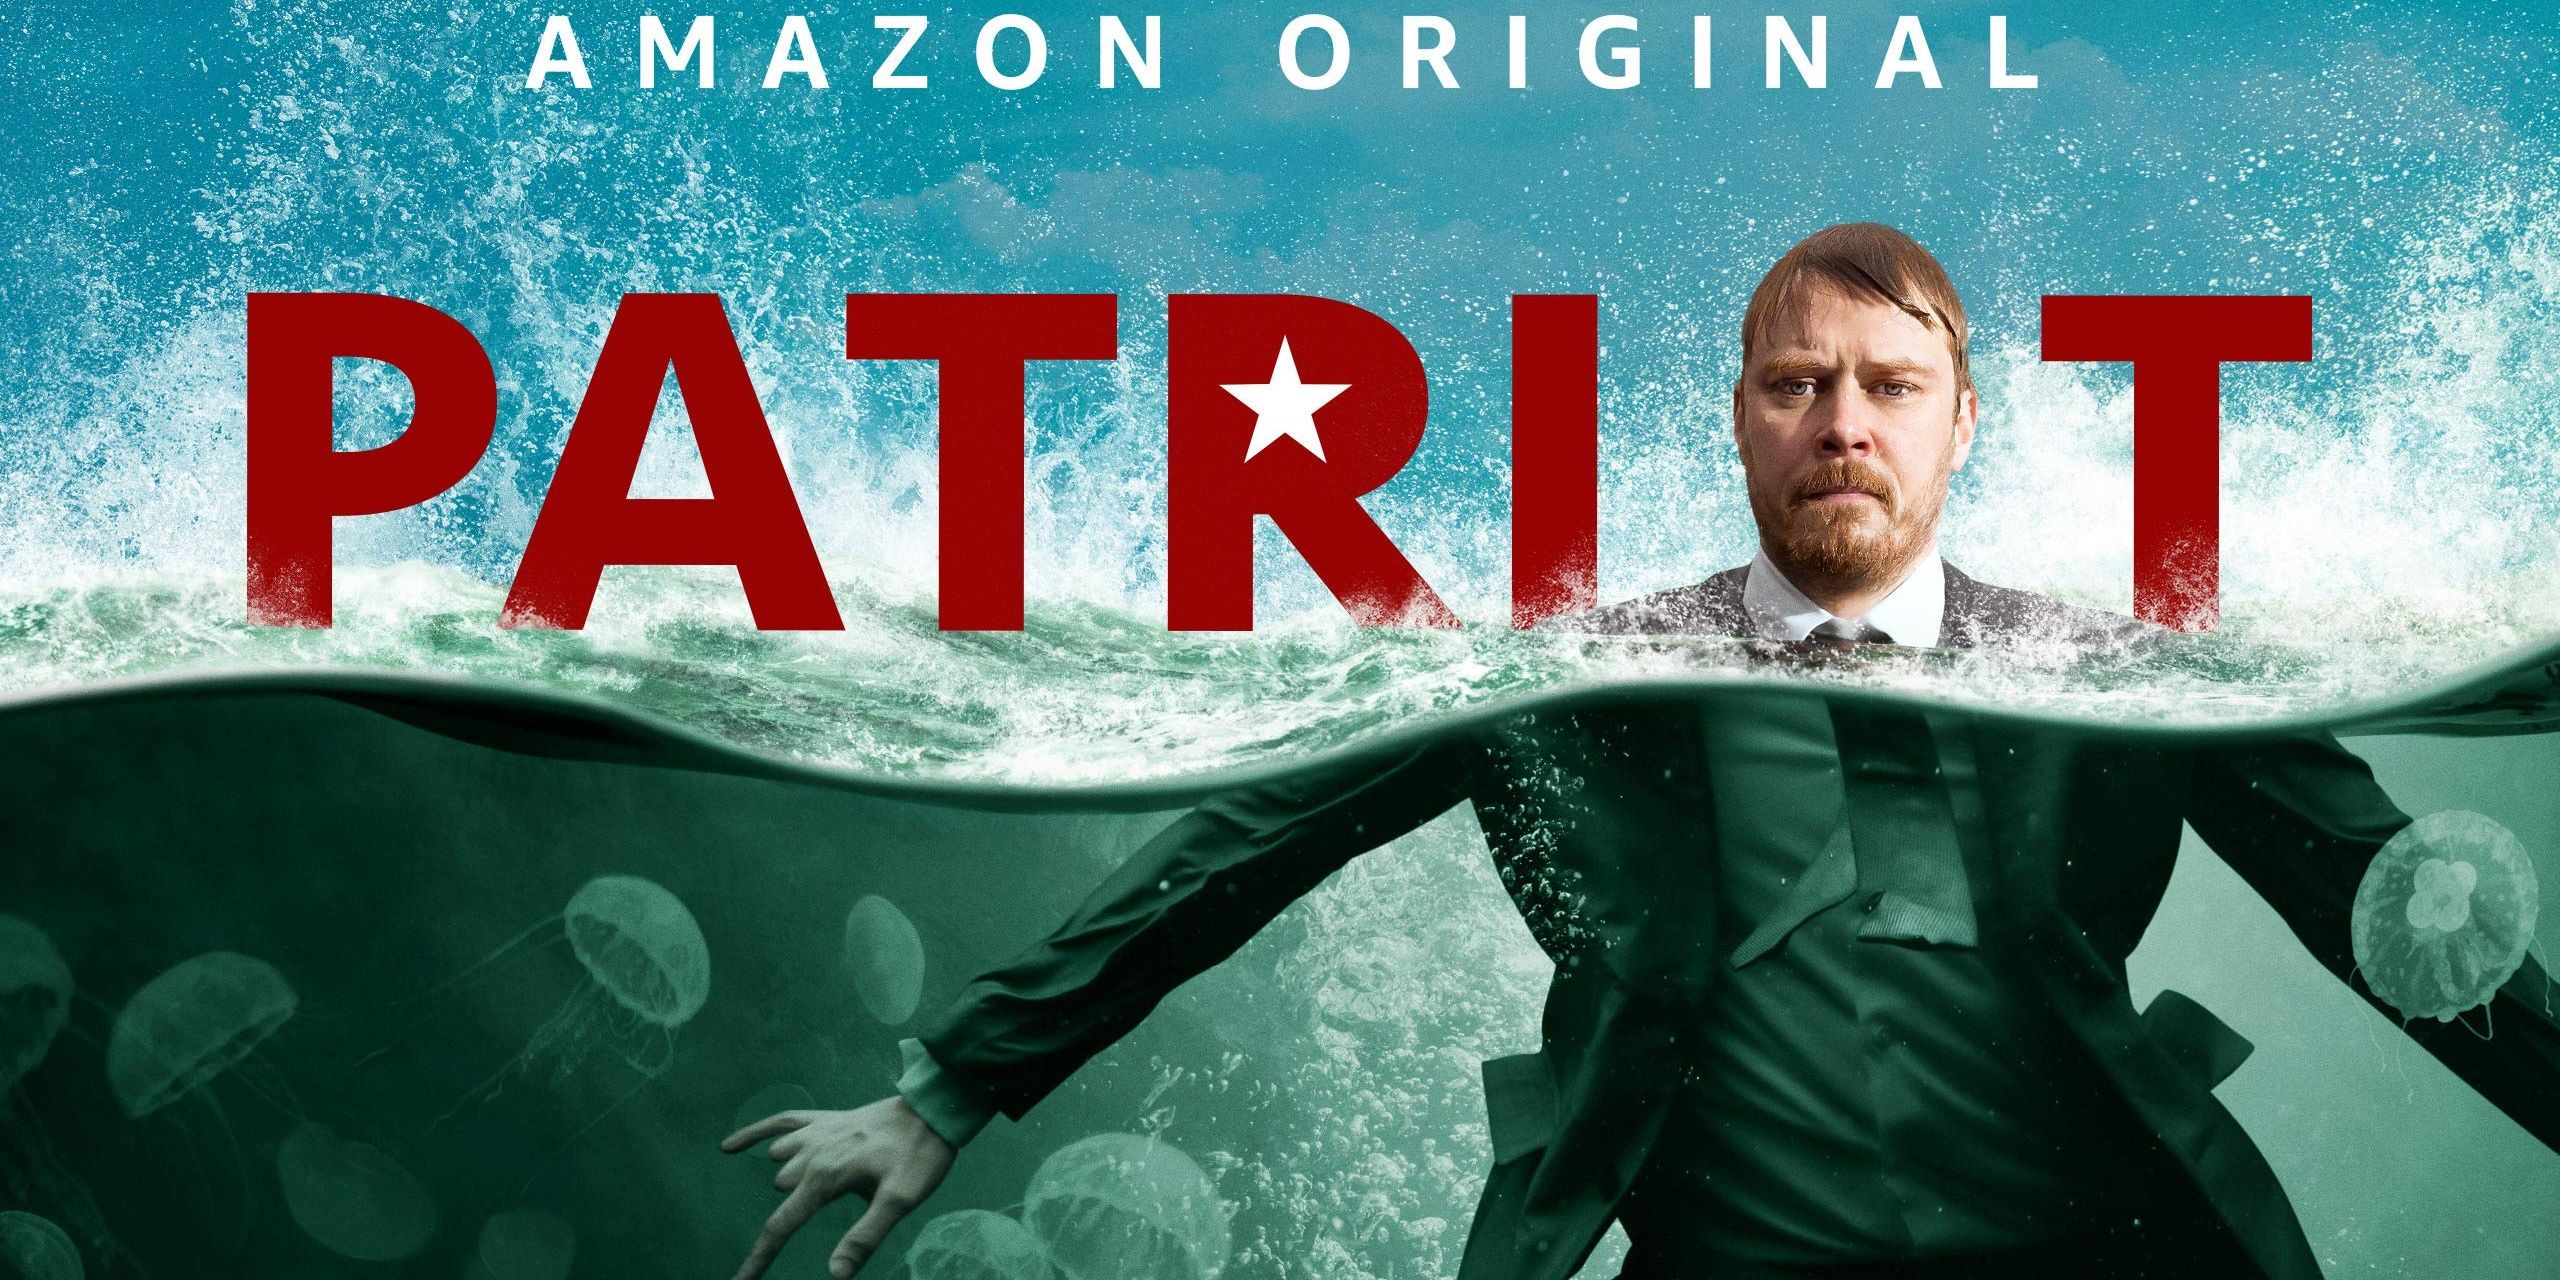 10 Highest Rated Amazon Prime Original Series (According To Rotten Tomatoes)